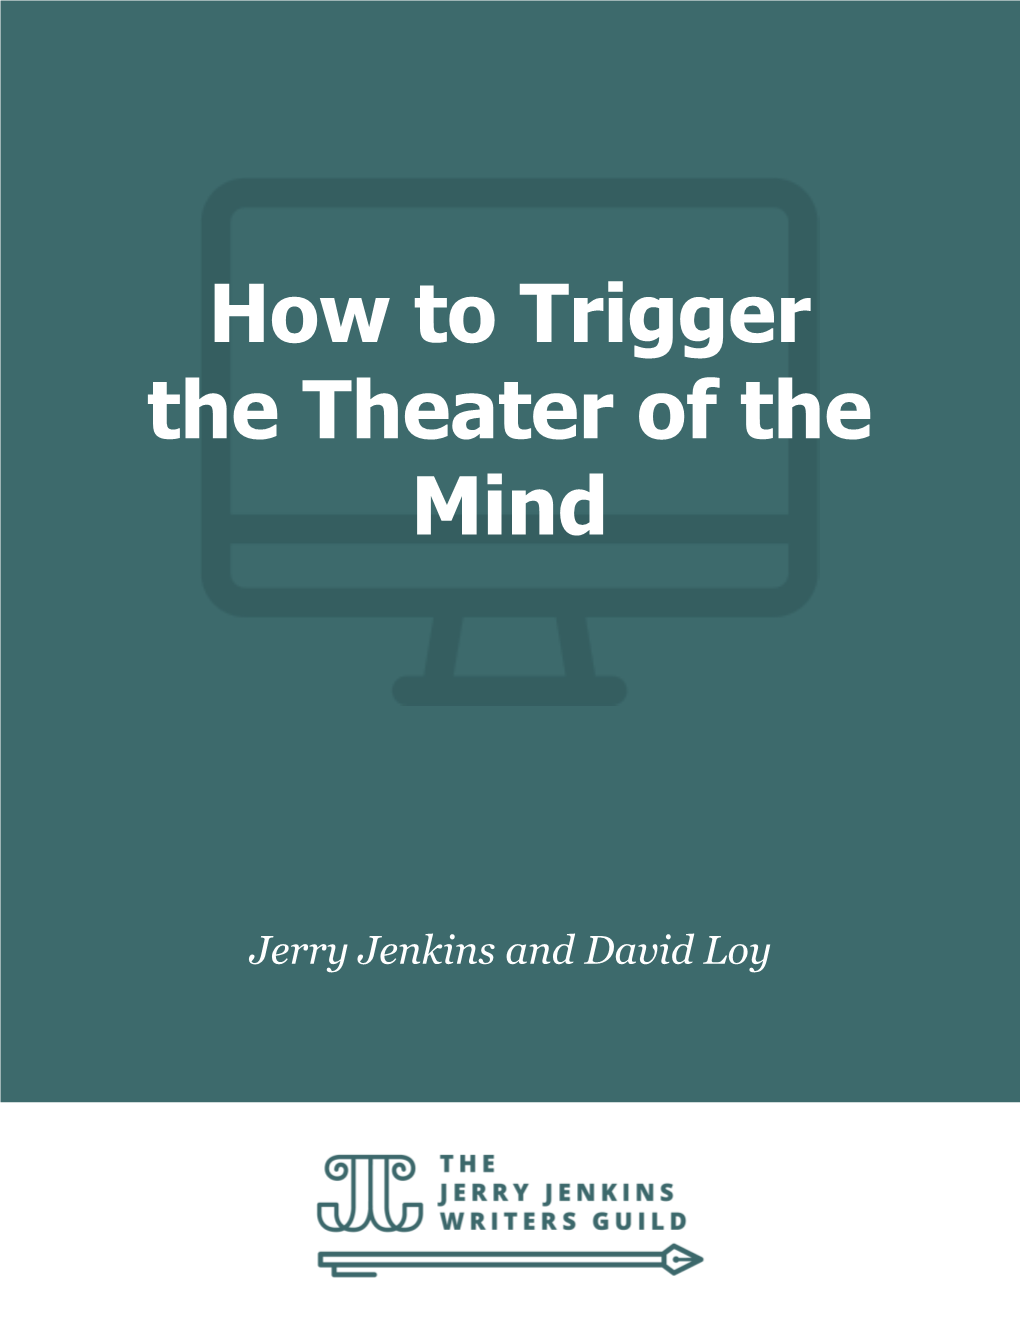 How to Trigger the Theater of the Mind